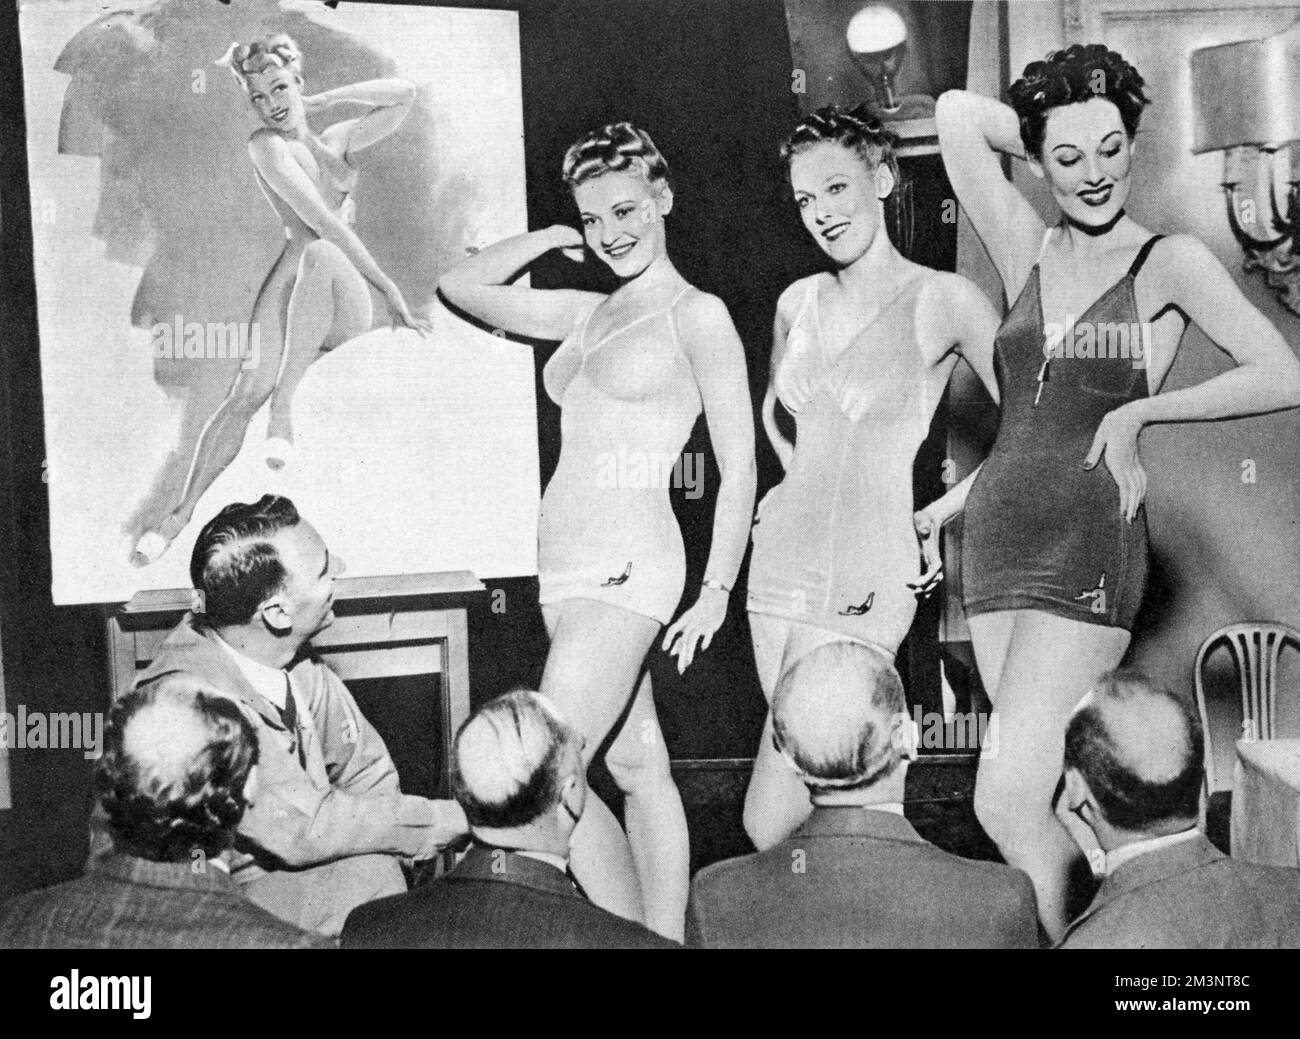 Pin-up artist Merlin Enabnit posing with some of his real-life models to promote his series of pin-ups featuring in The Sketch magazine in 1940.  An American artist, Merlin, used the new air-brush technique to paint extremely curvaceous and pneumatic girls.  His pin-up series in The Sketch was followed by the Lovelies of David Wright.  The editorial accompanying this piece compares the pin-ups of Merlin with those by Raphael Kirchner published in The Sketch during World War I.       Date: 1940 Stock Photo